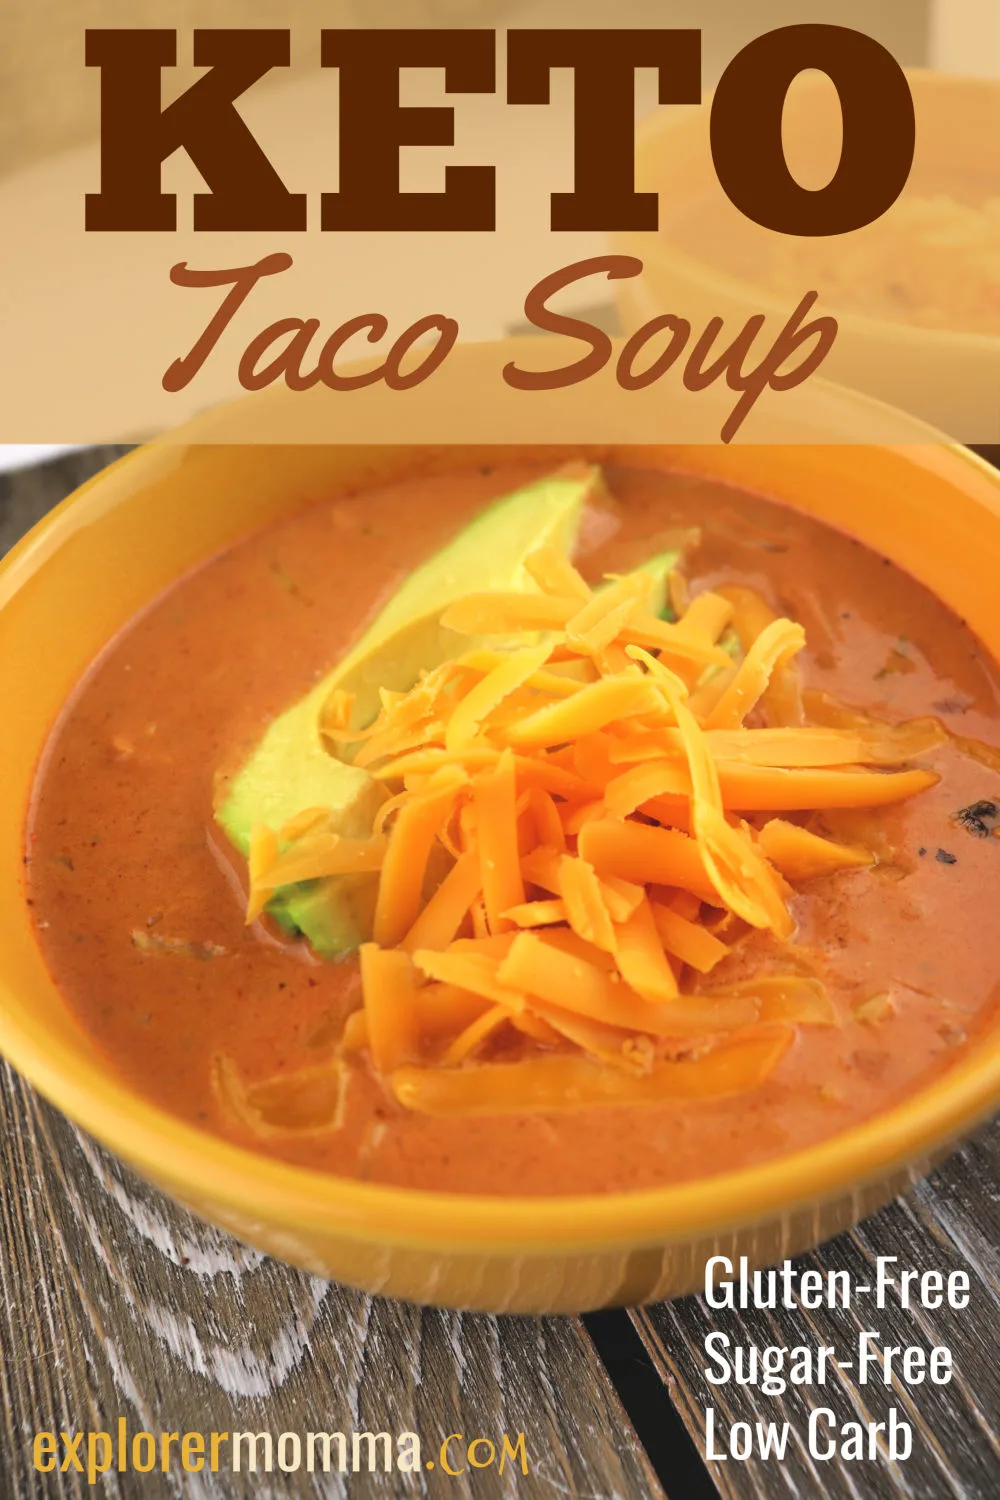 An easy weeknight meal! Keto taco soup is the perfect low carb recipe for an easy family dinner. Gluten-free, a great recipe for your keto diet and ketogenic lifestyle. #ketodinners #lowcarbsoups